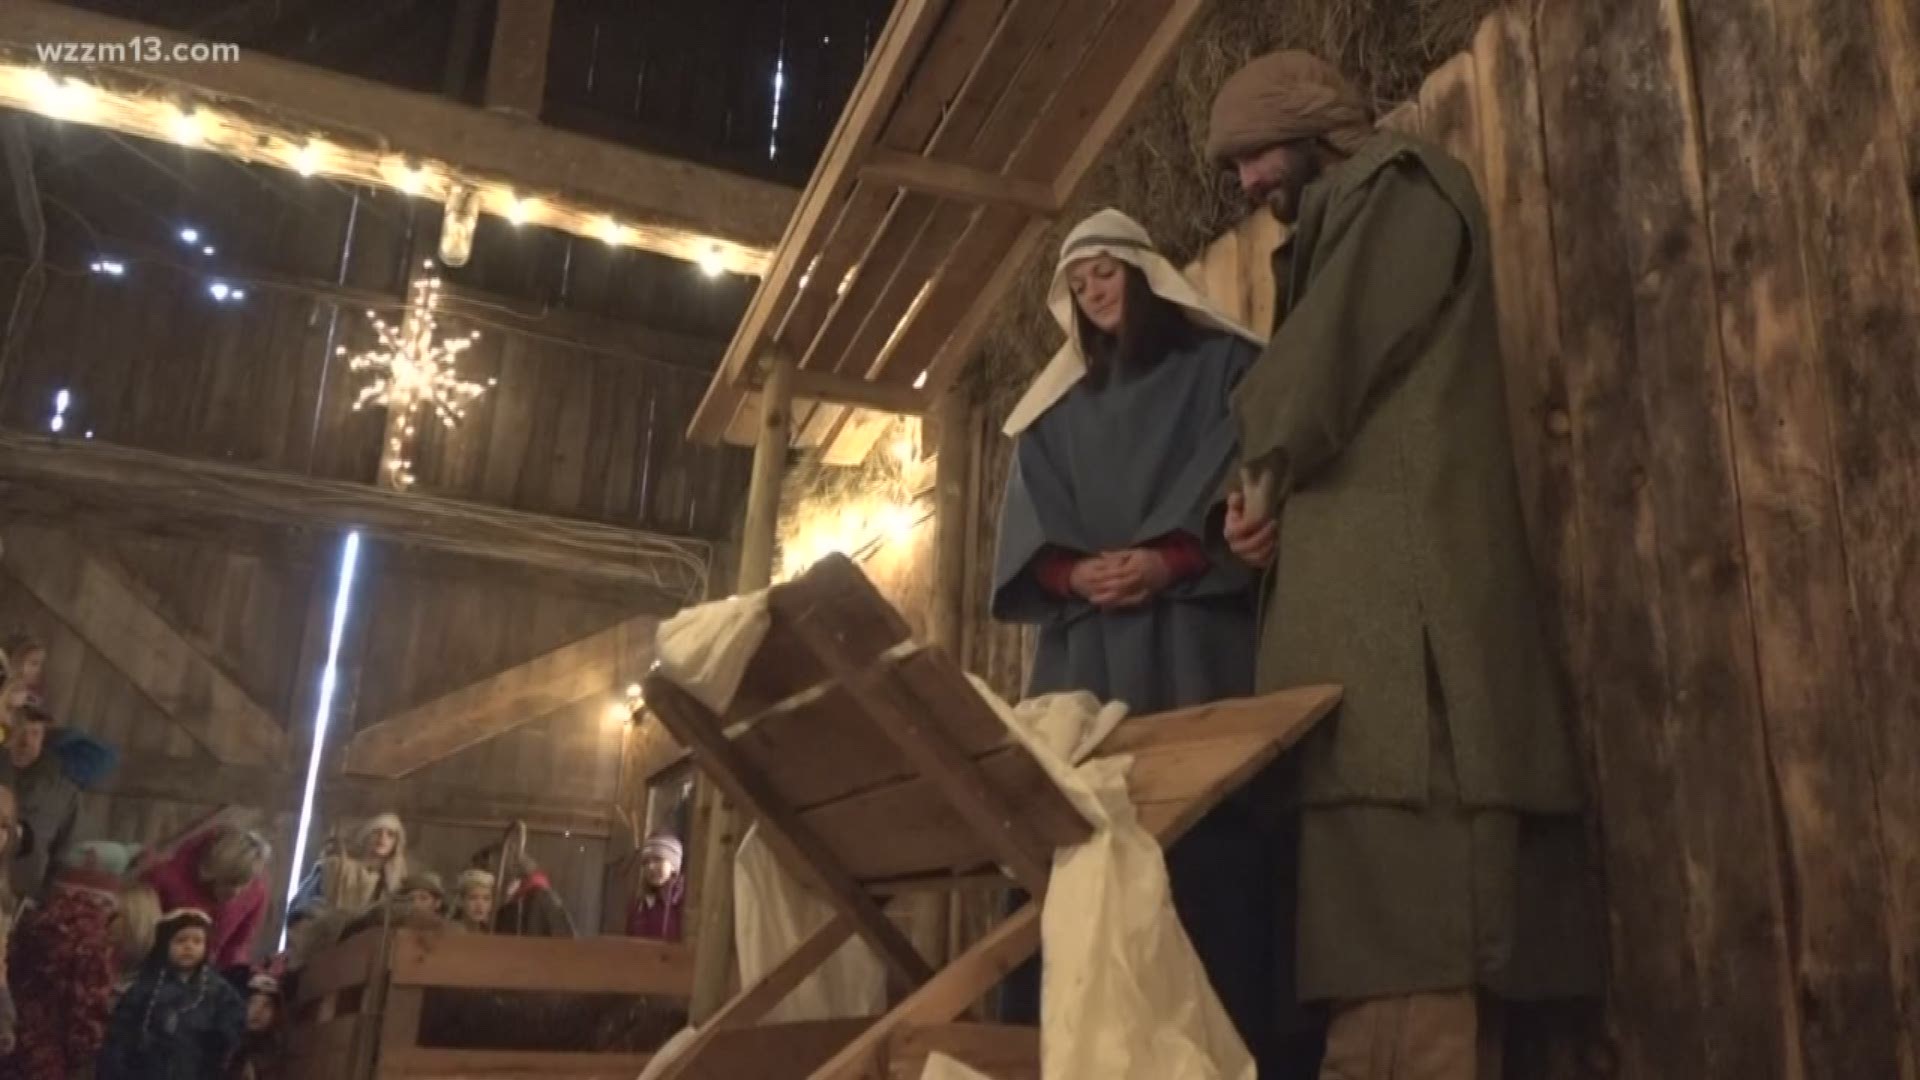 Check out a live Nativity scene at the Critter Barn